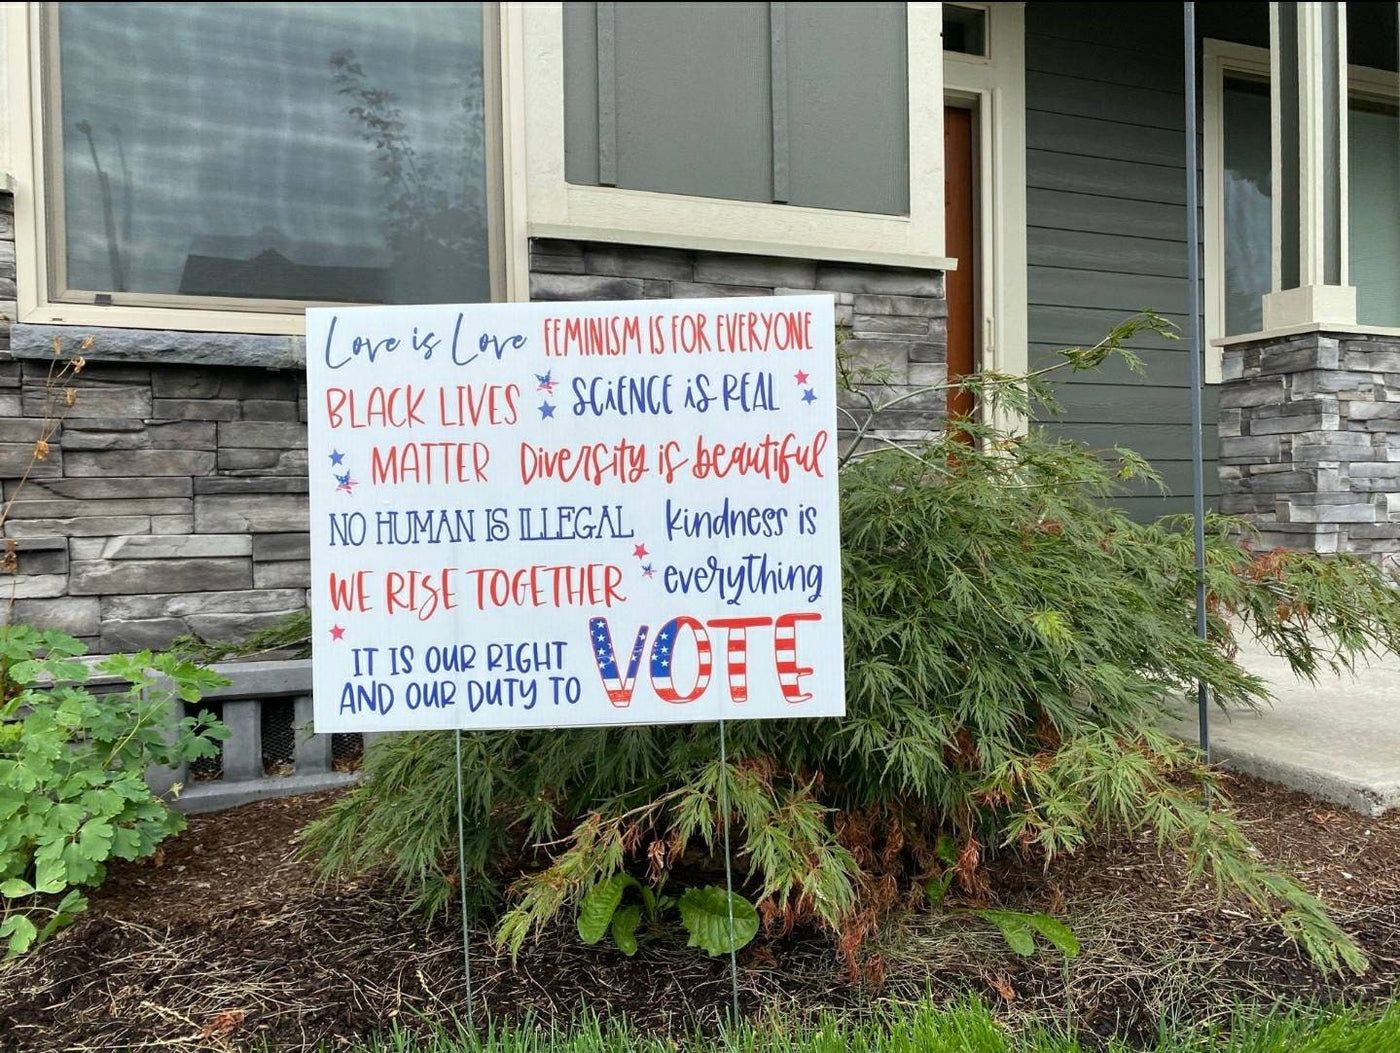 In this House yard sign